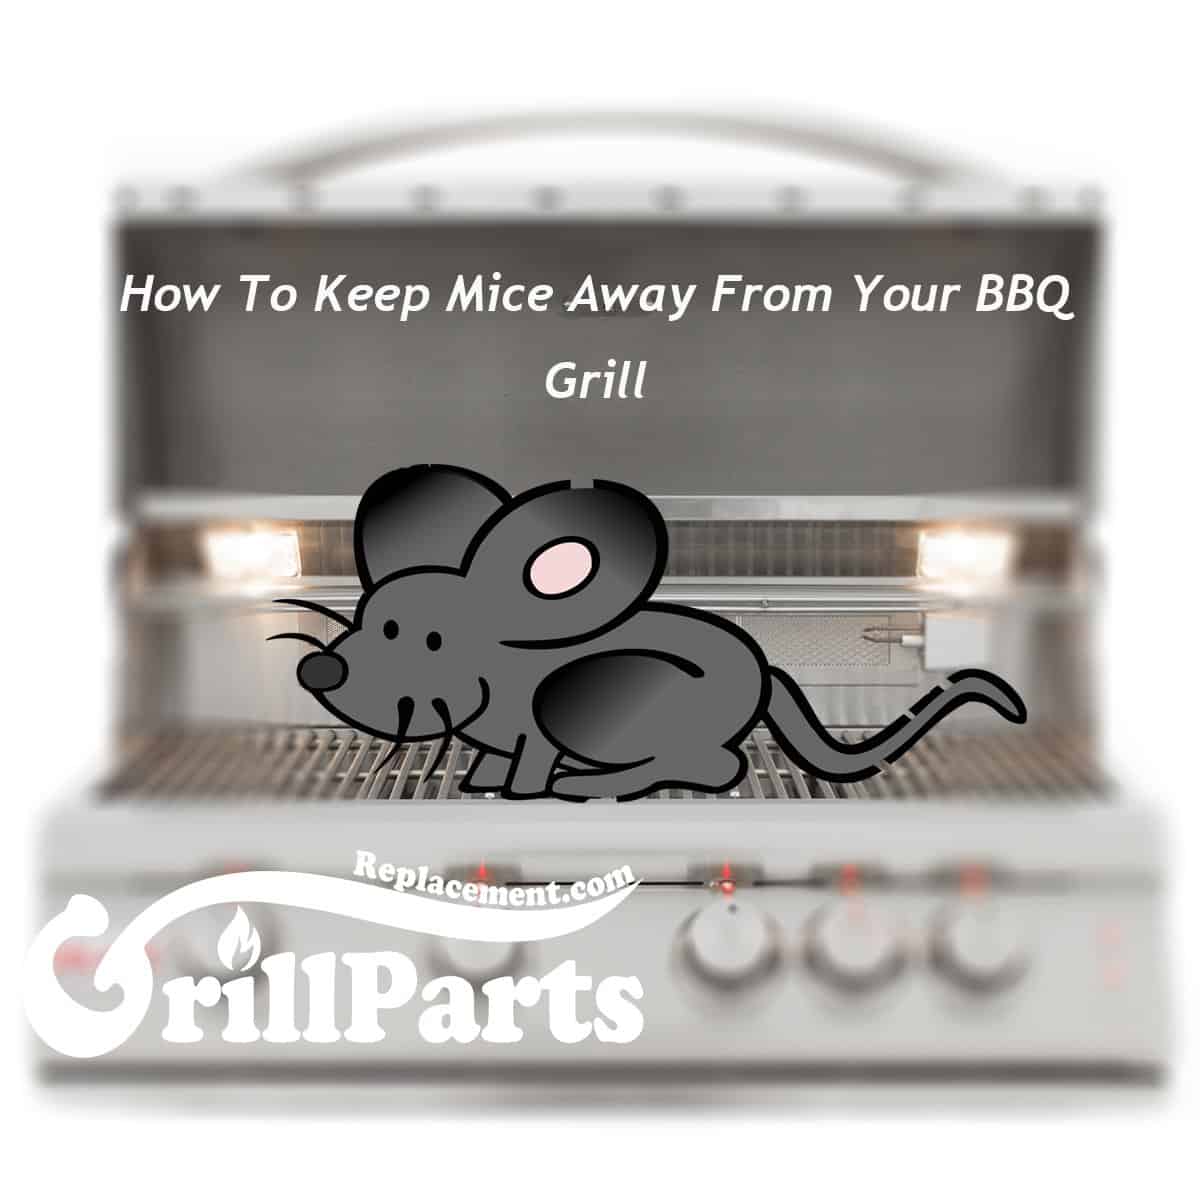 Best Practices to Keep Mice out of Grill & BBQ